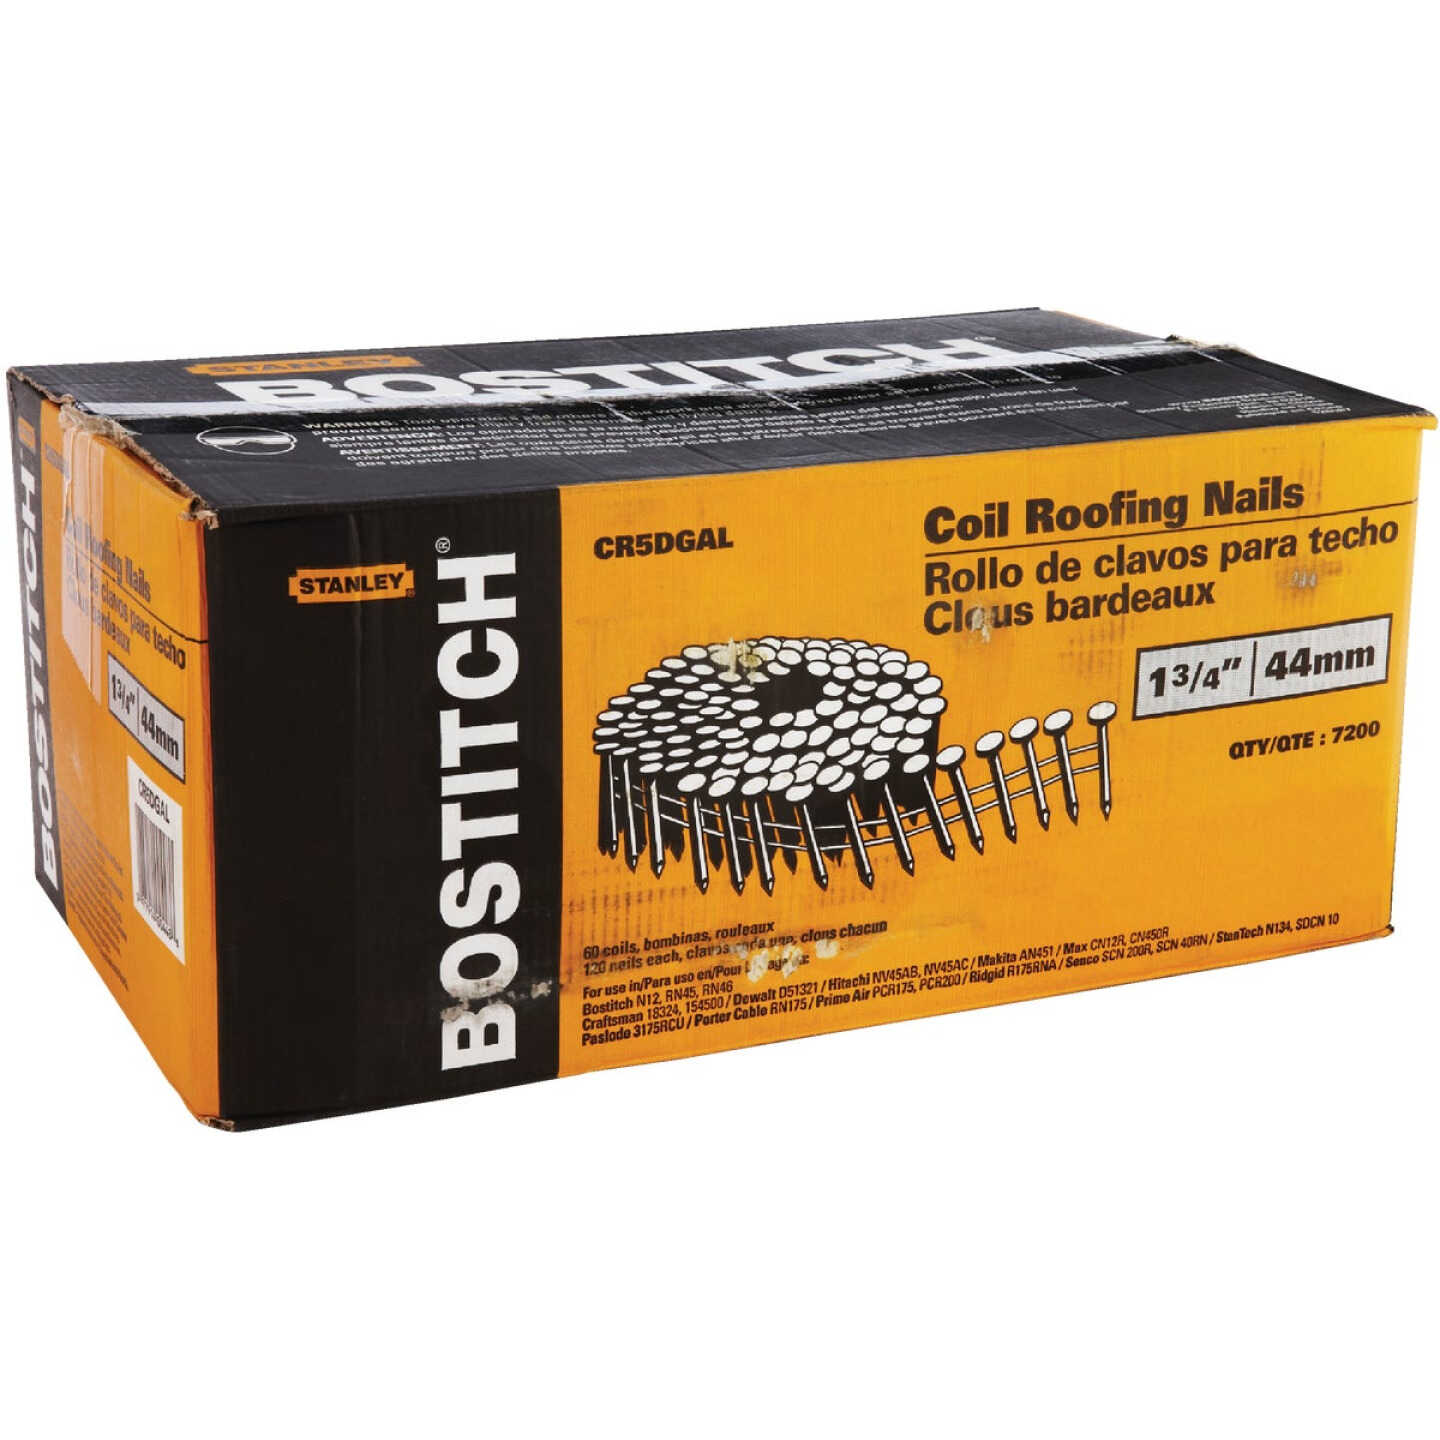 Bostitch 15 Degree Wire Weld Galvanized Coil Roofing Nail, 1-3/4 In. x .120 In. (7200 Ct.) Image 2